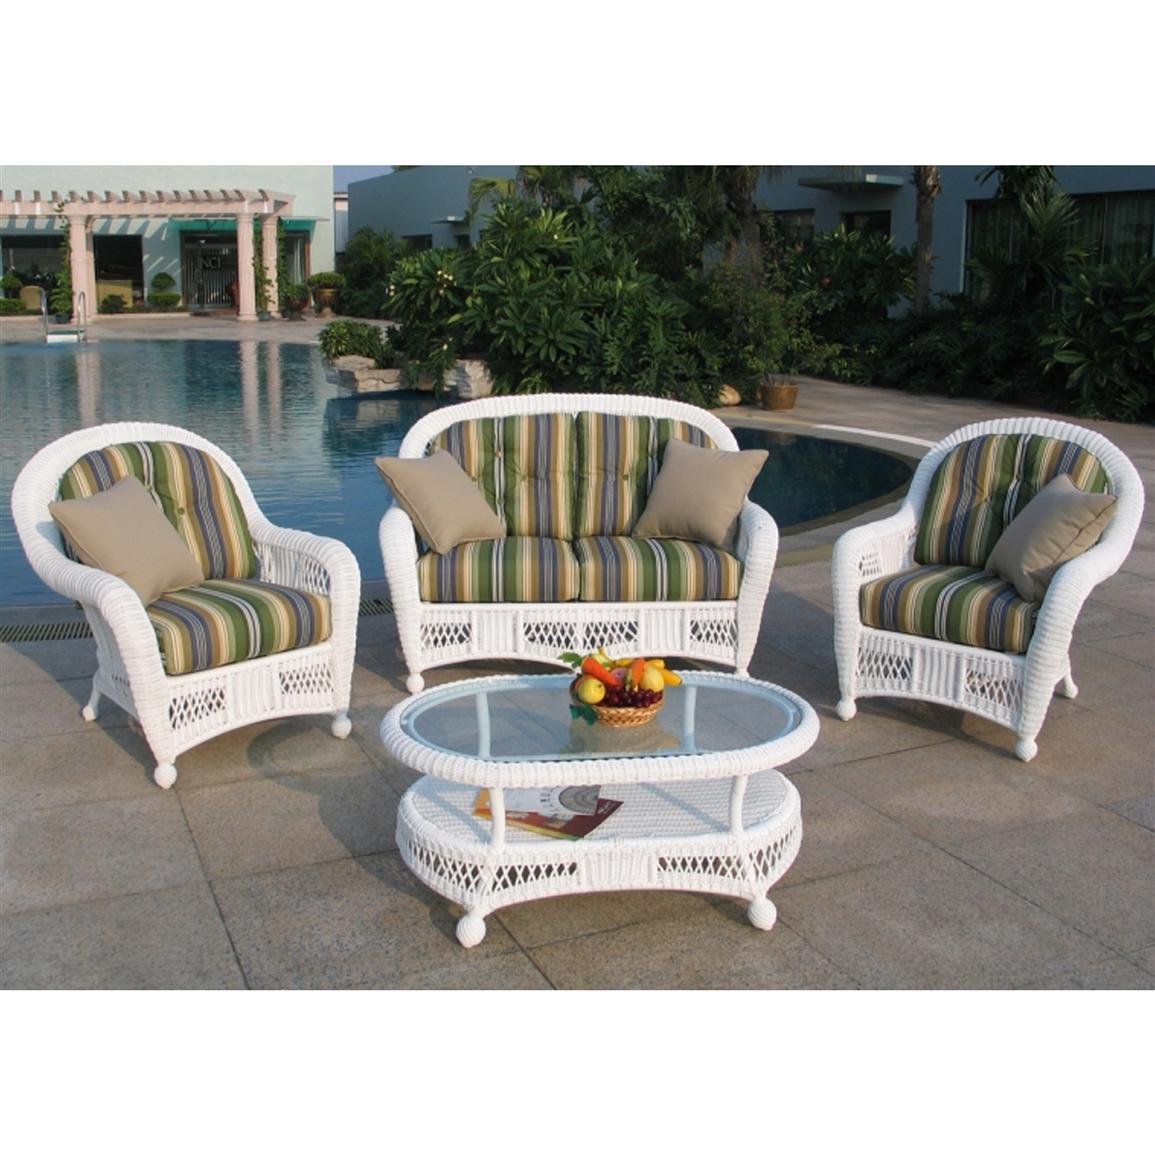 Chicago Wicker® Montego 4 - Pc. Wicker Patio Furniture Collection